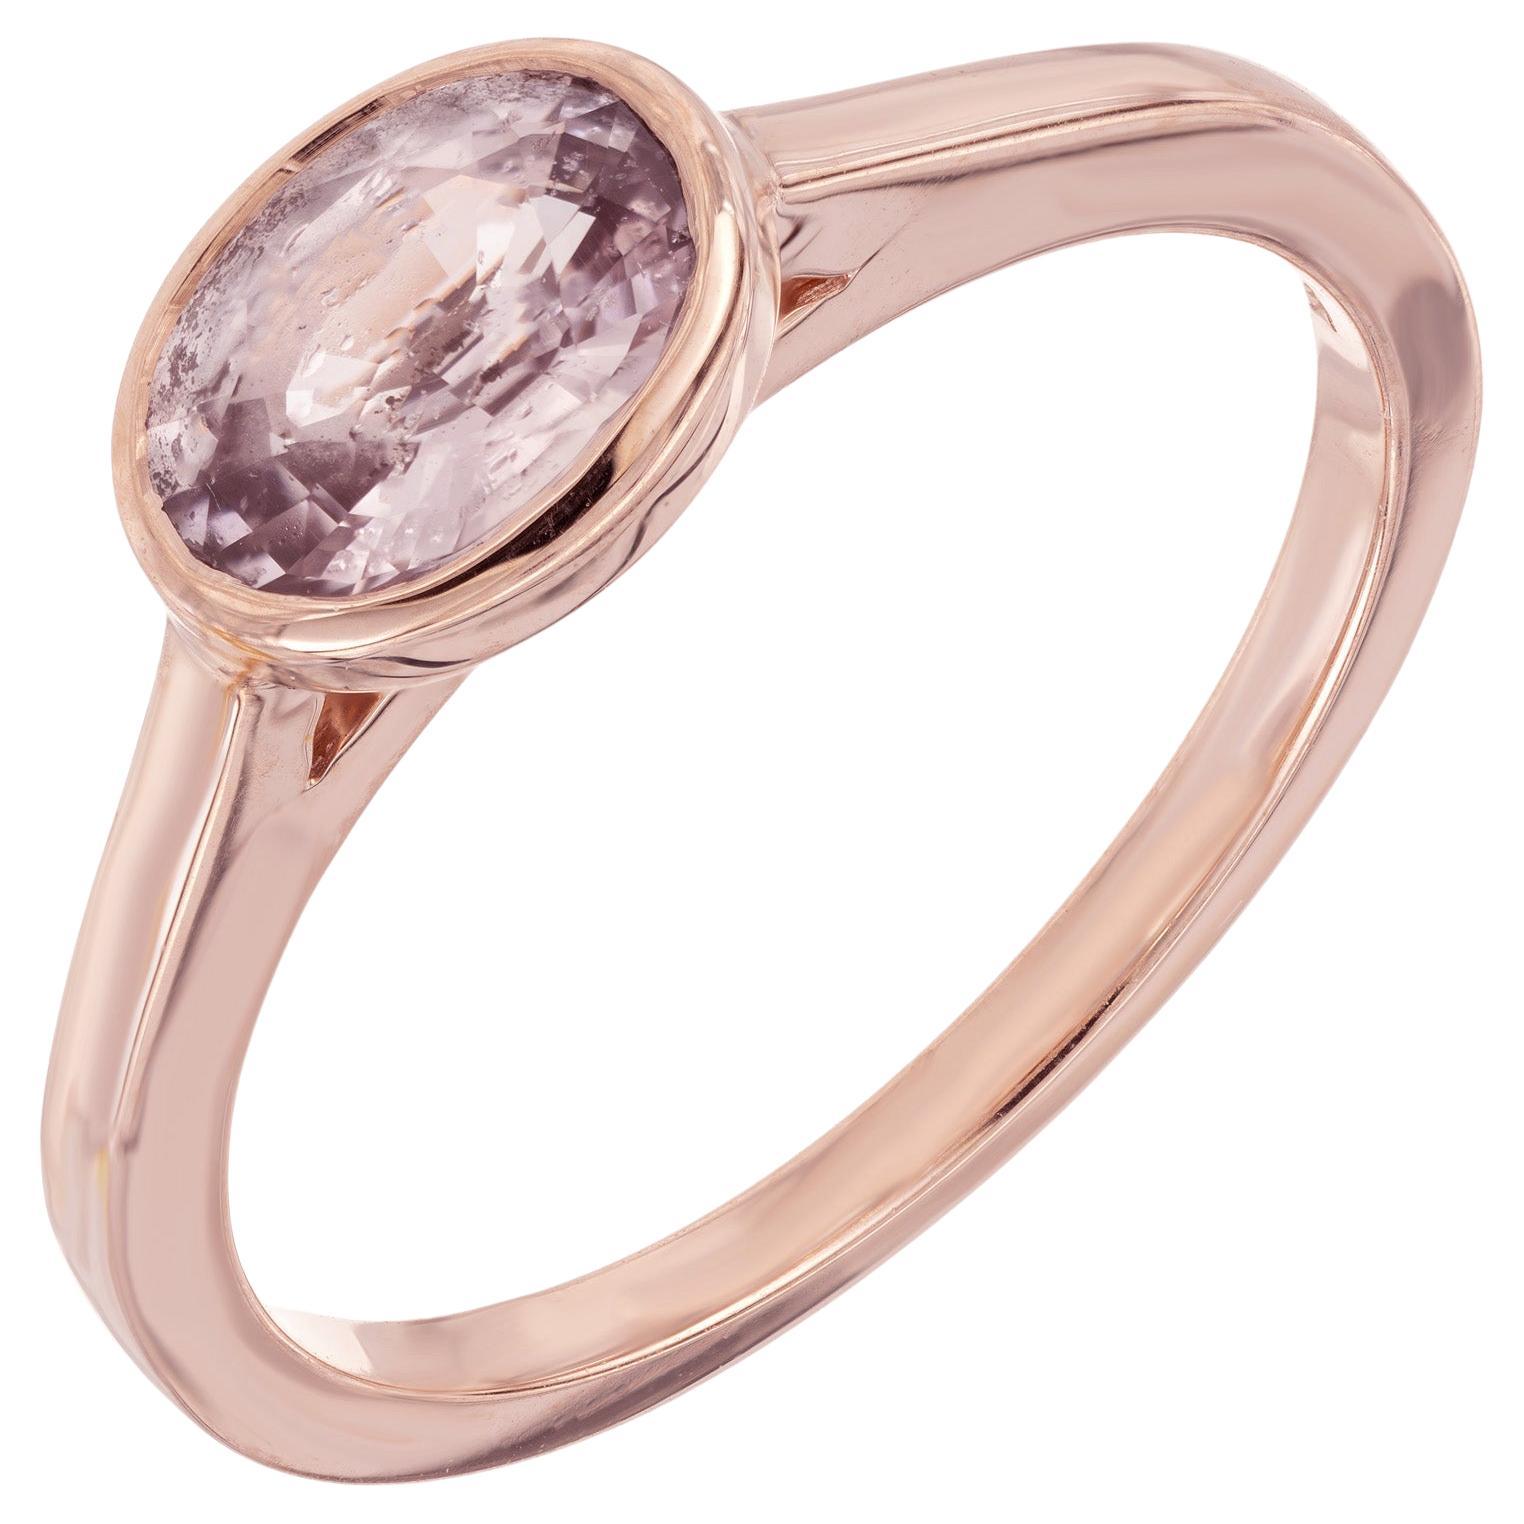 For Sale:  Peter Suchy GIA 1.06 Carat Padparadscha Sapphire Rose Gold Engagement Ring